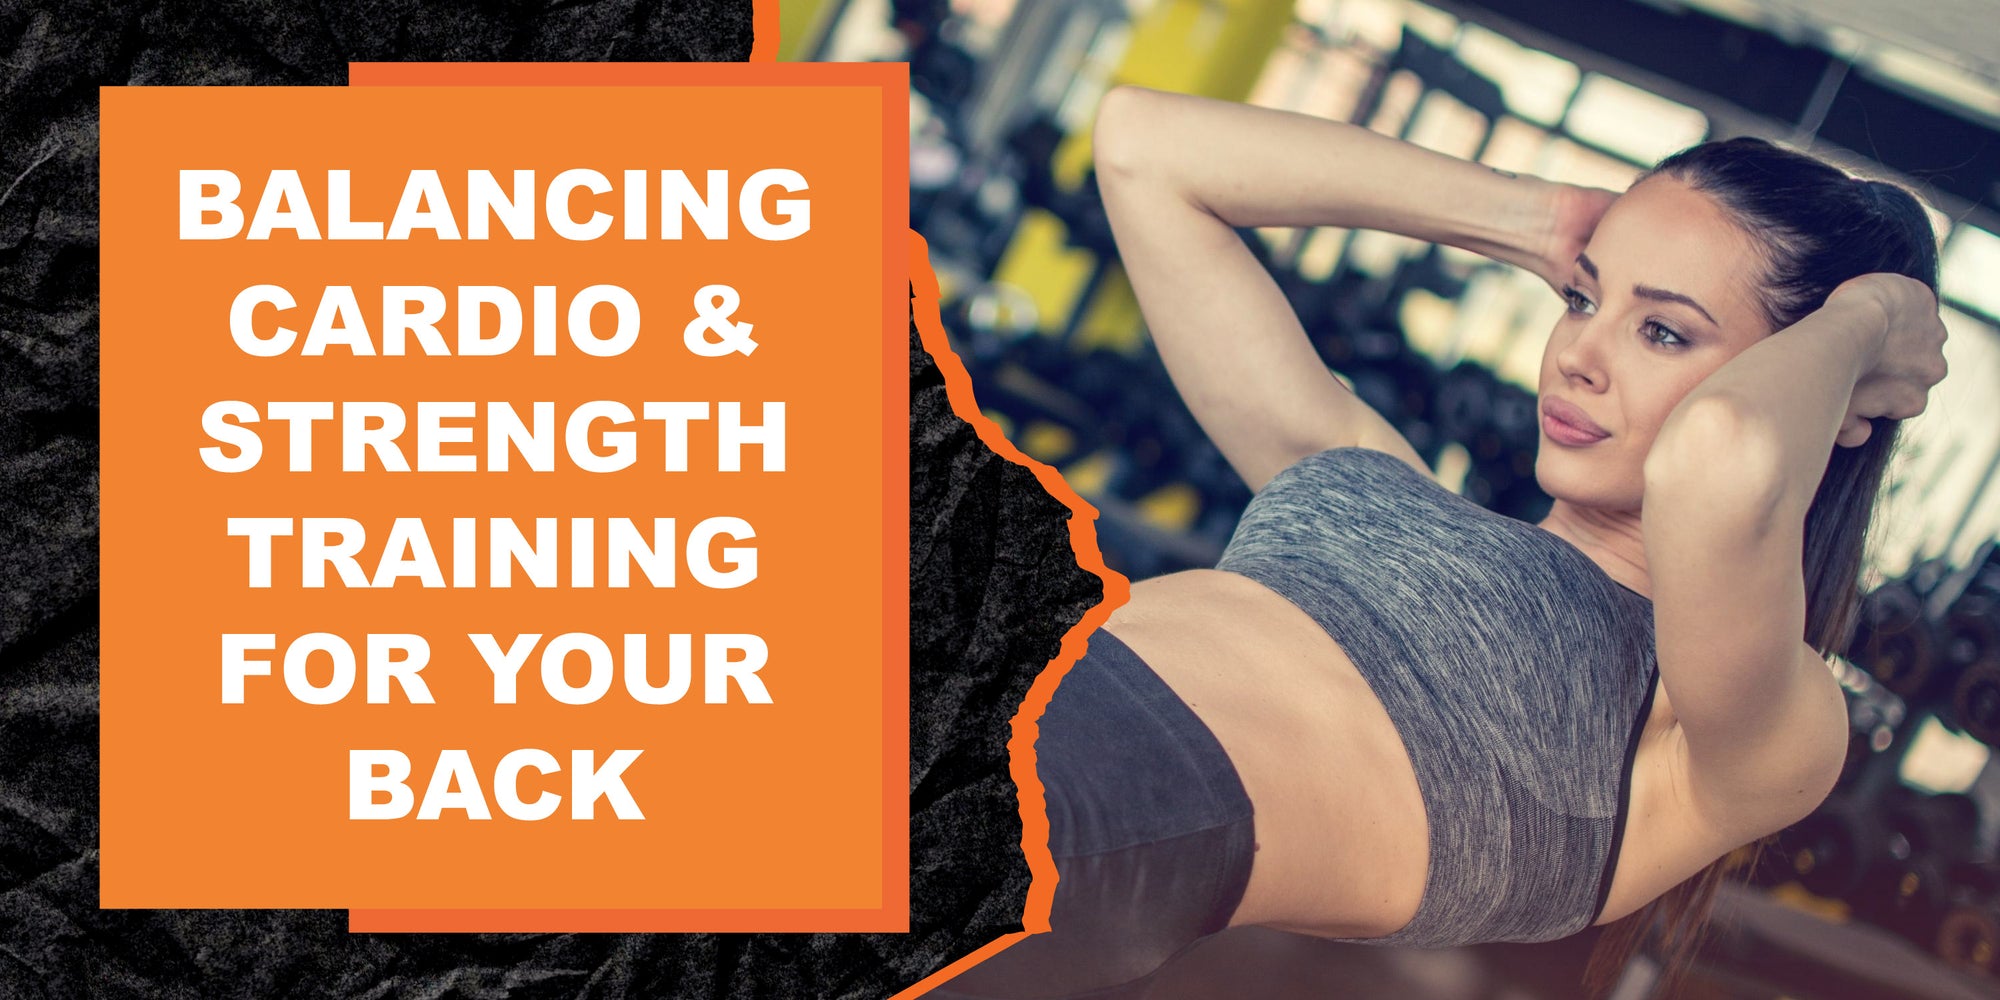 The Right Balance Between Cardio & Strength Training for Your Back